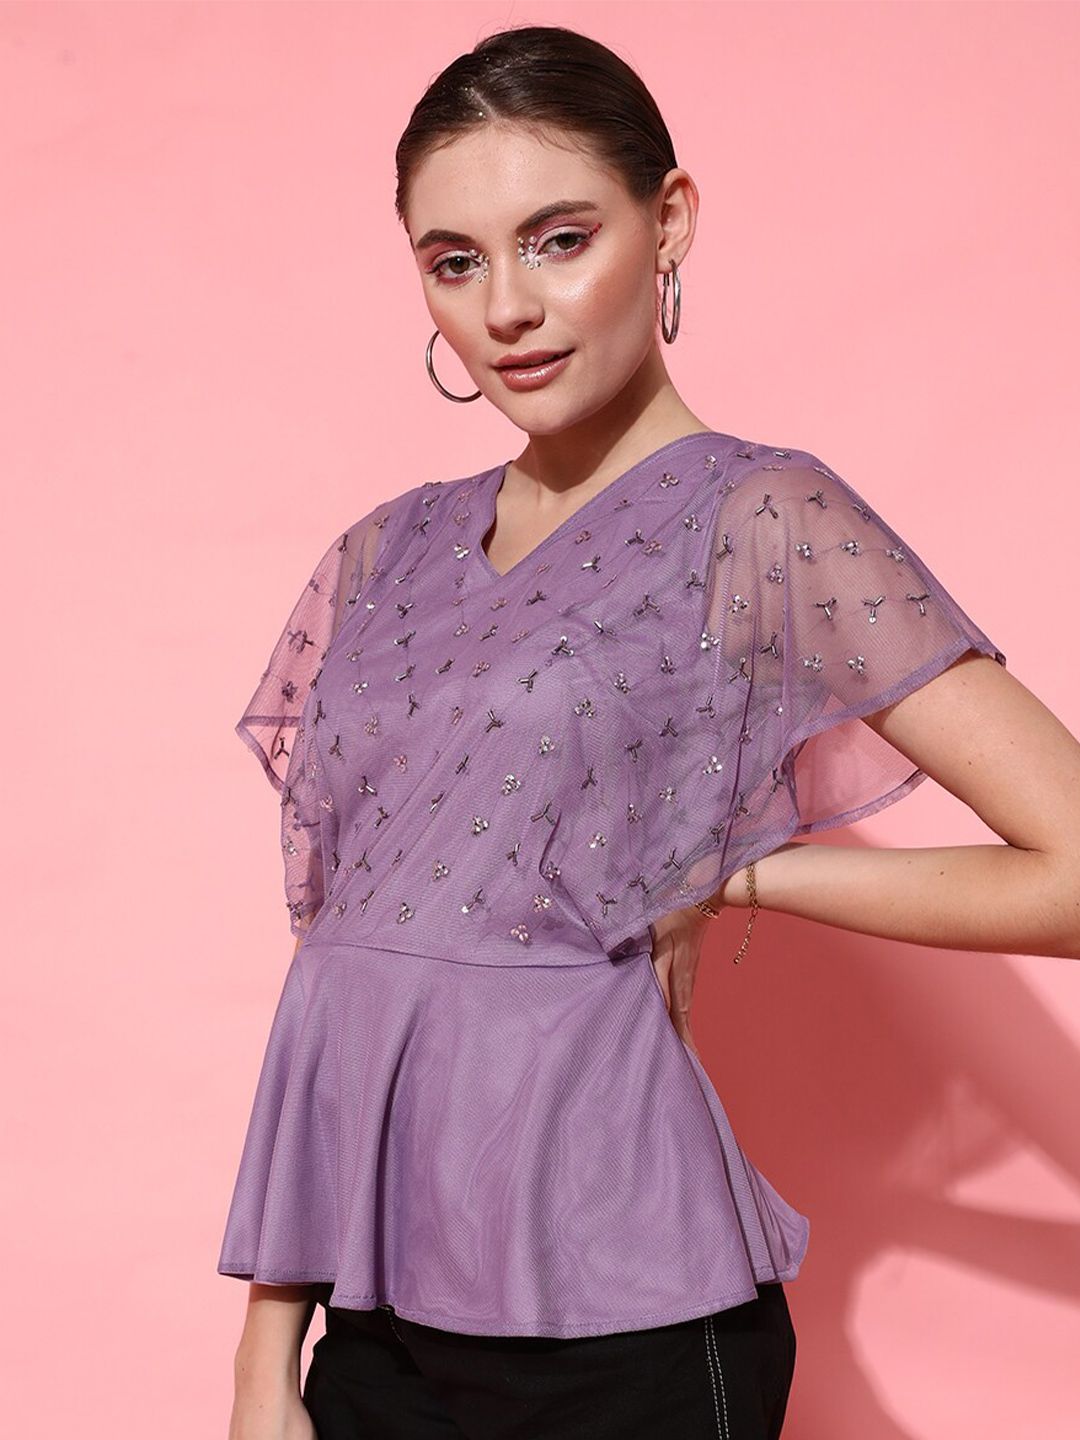 STREET 9 Lavender Embellished Top Price in India